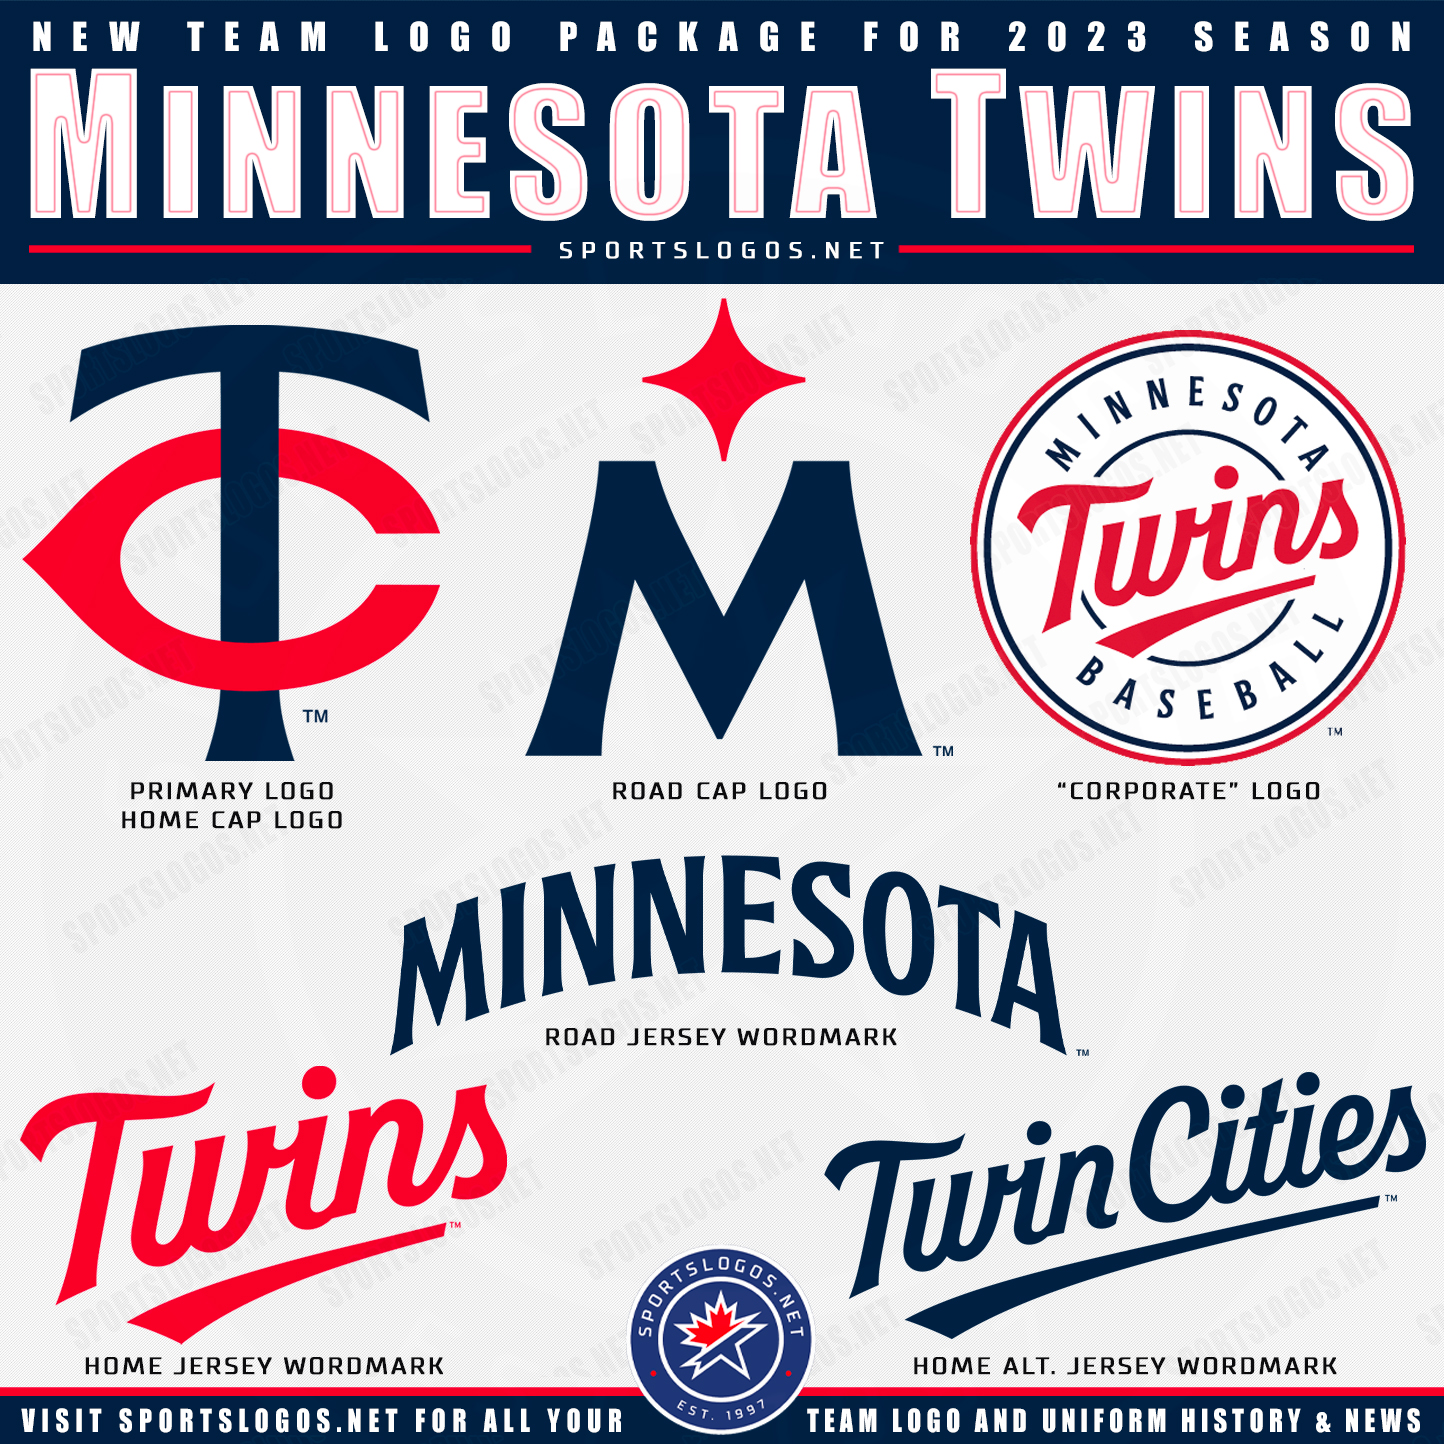 Chris Creamer  SportsLogos.Net on X: Along with the new uniforms comes new  Minnesota Twins logos. The modified TC logo is now the primary logo,  there's a new M logo worn on